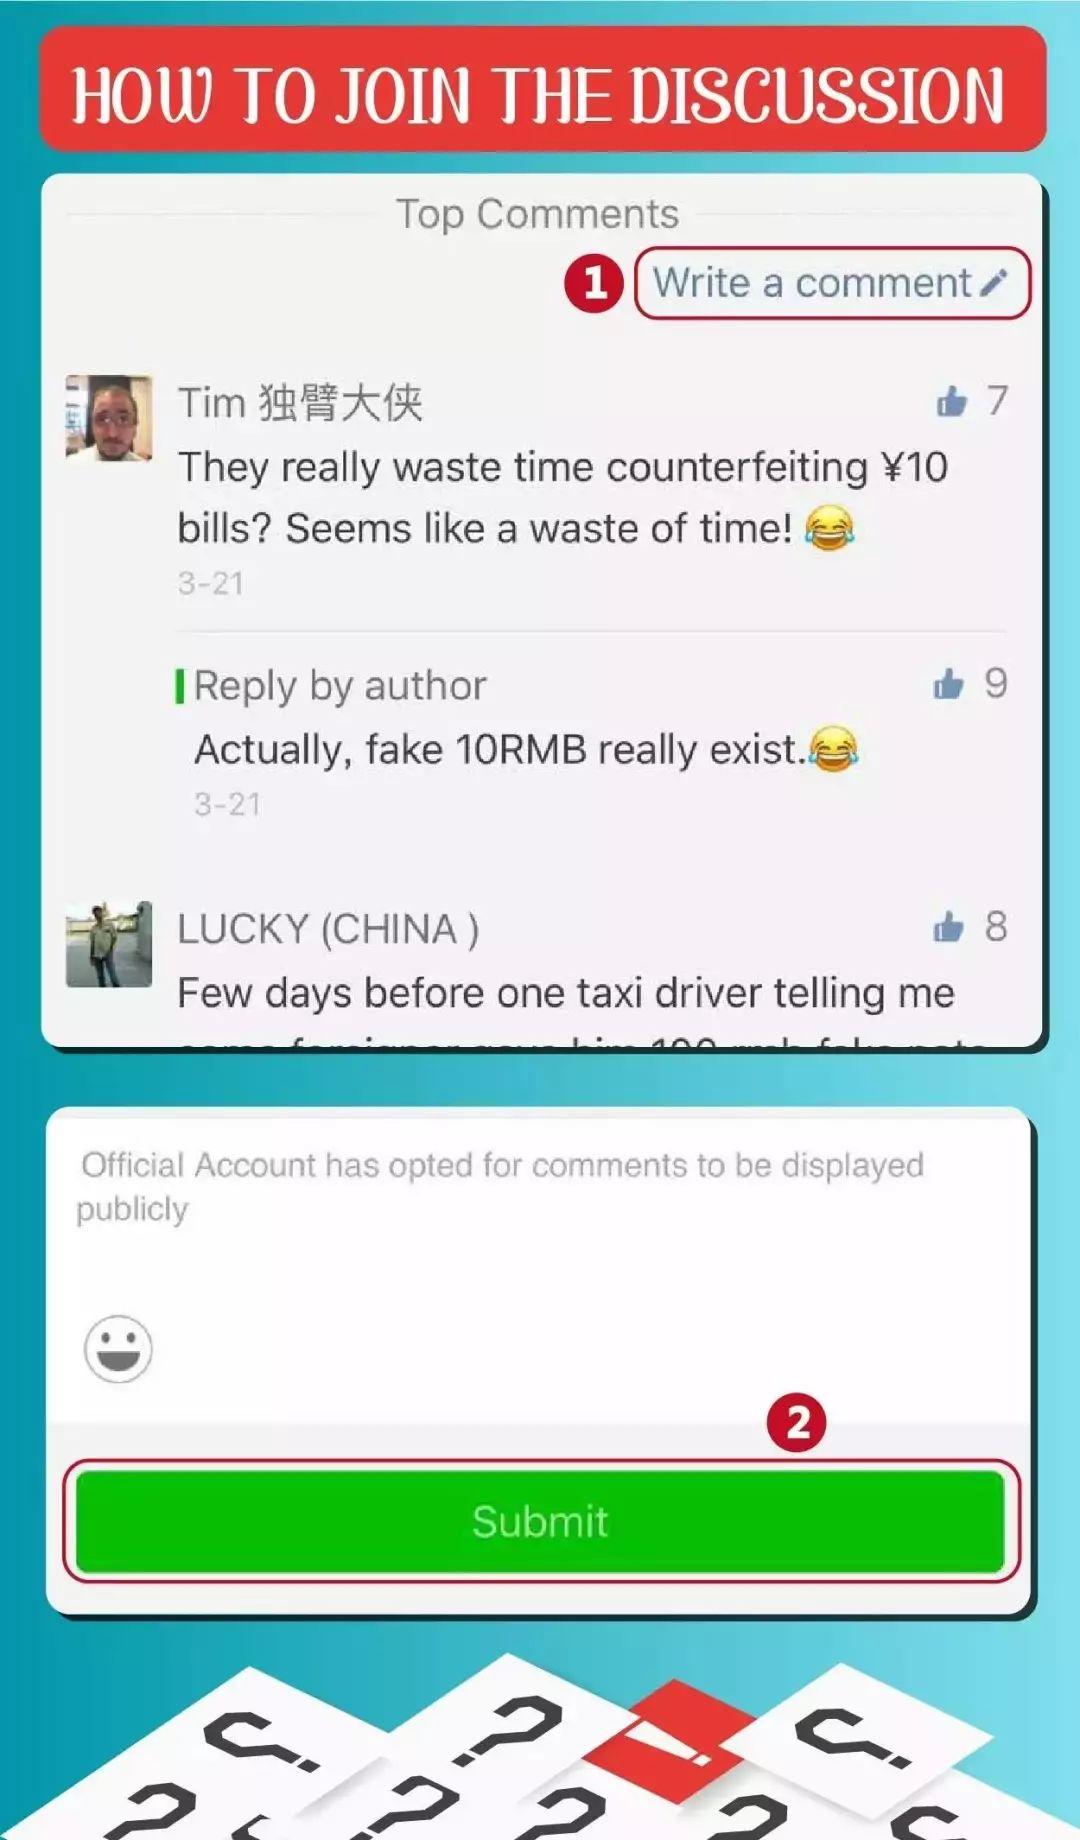 safe to use didi hitchhiking service in china? do you think so?